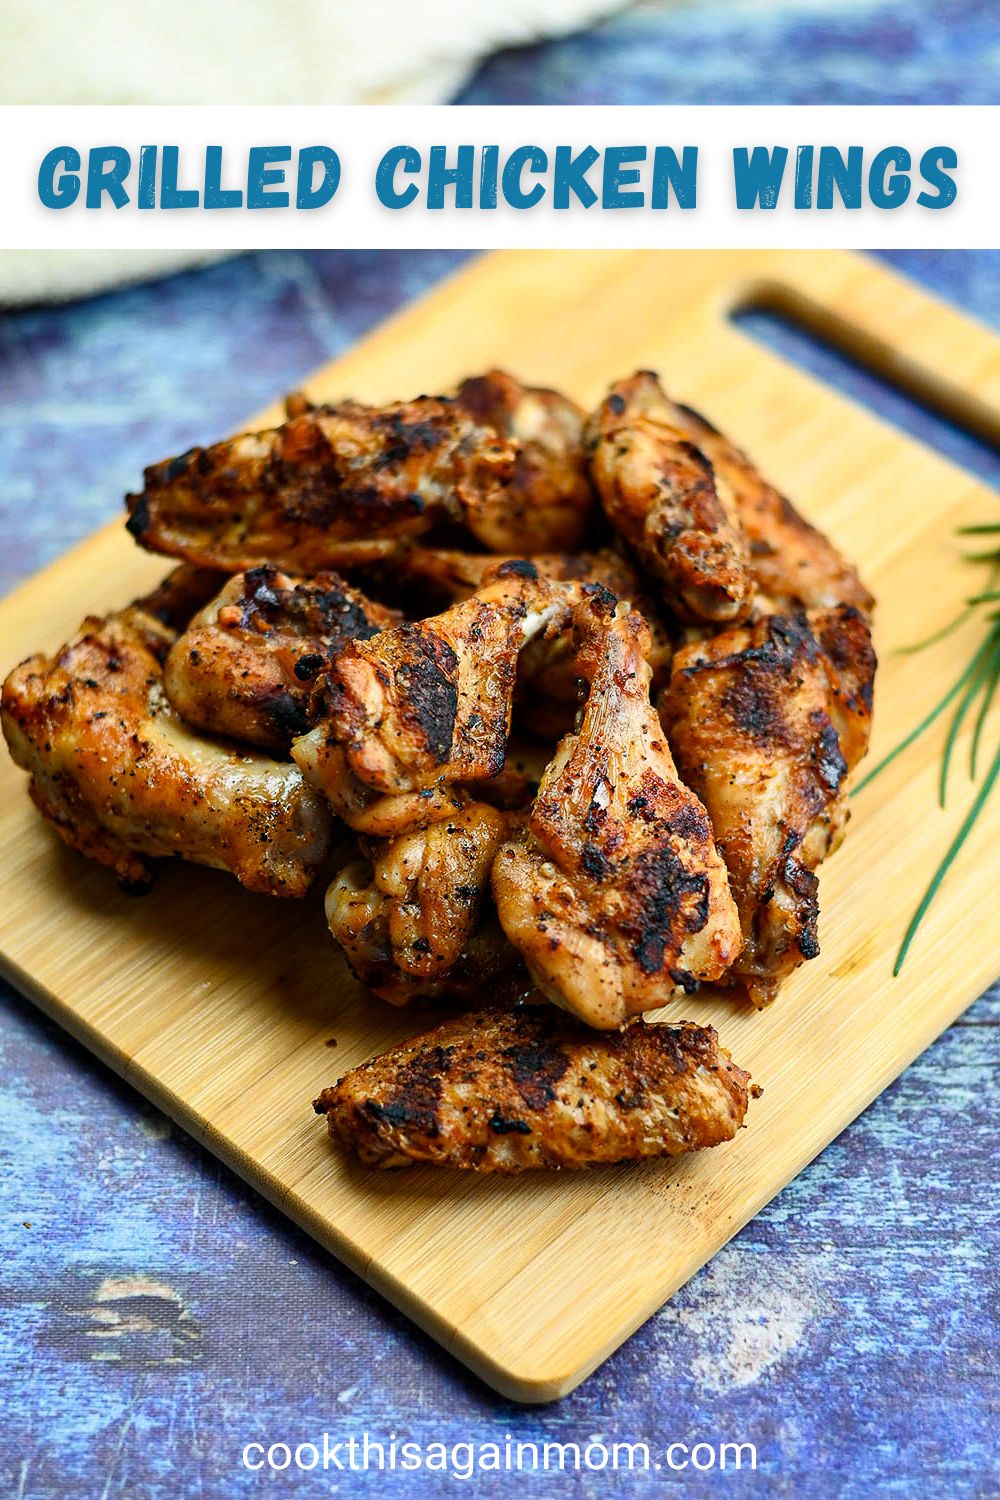 Simple Grilled Chicken Wings Recipe - Cook This Again Mom